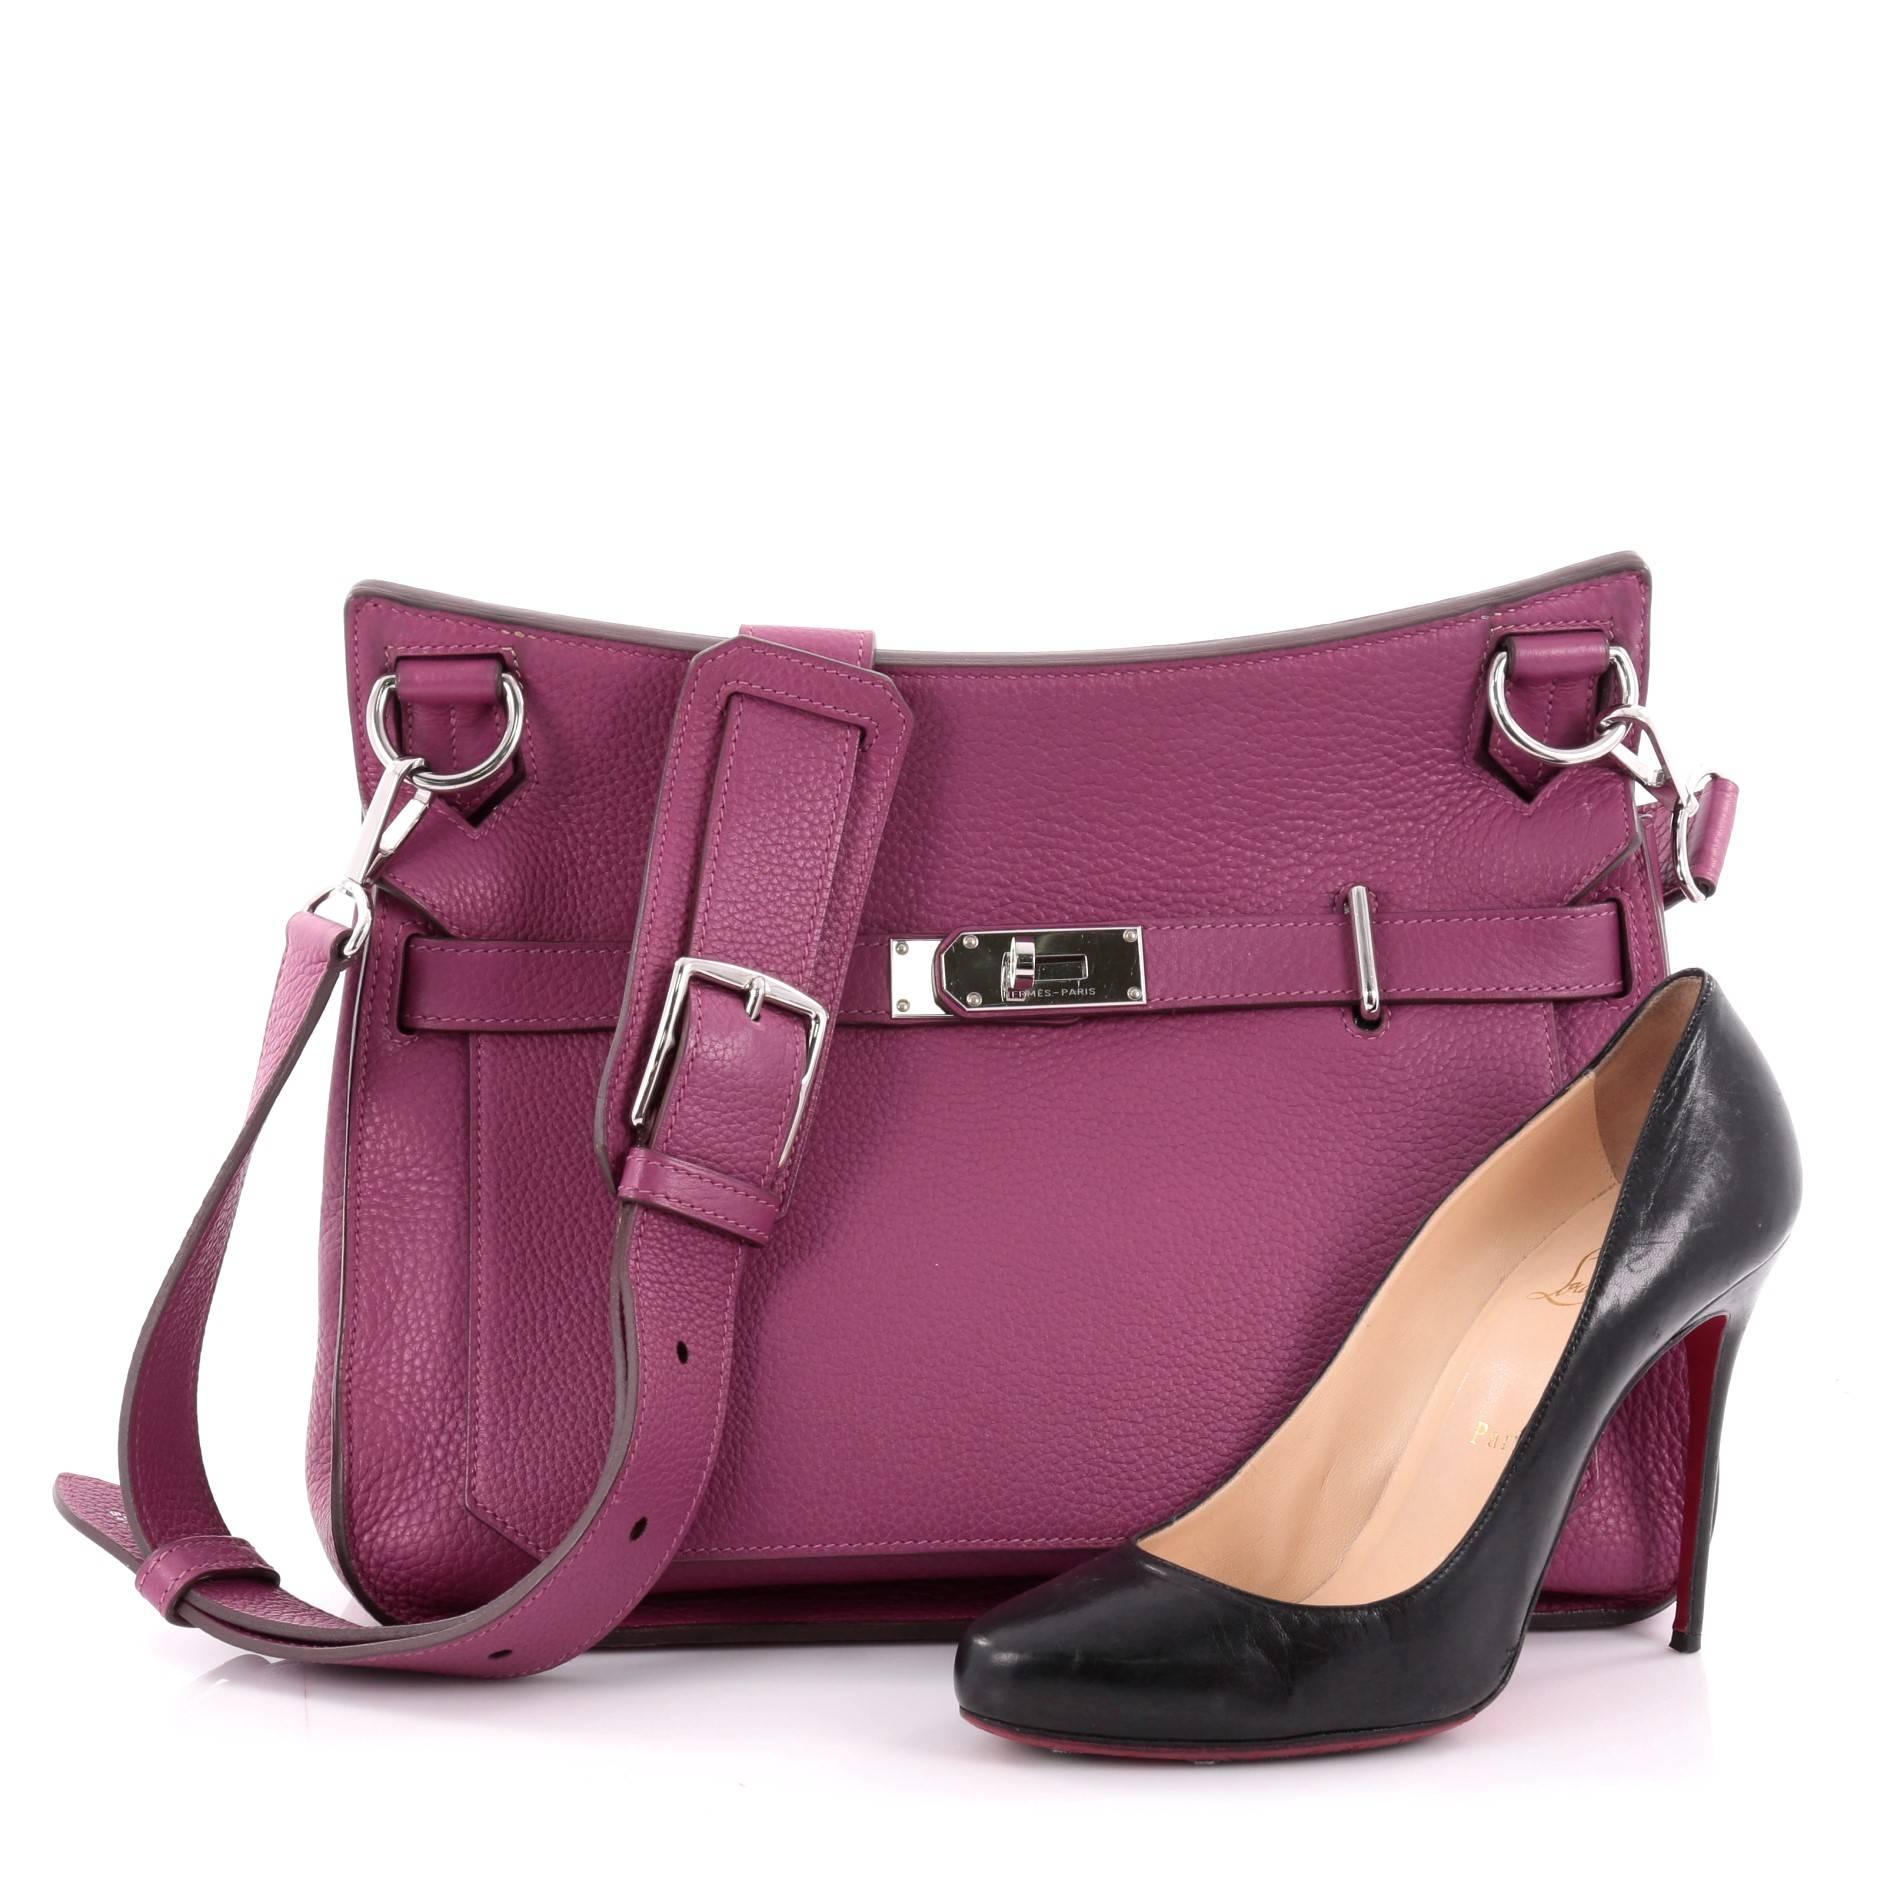 This authentic Hermes Jypsiere Handbag Clemence 34 is a current and favorite style among Hermes lovers. Inspired by the brand's iconic Kelly bag, this luxurious and industrial messenger is crafted in scratch-resistant tosca purple leather featuring